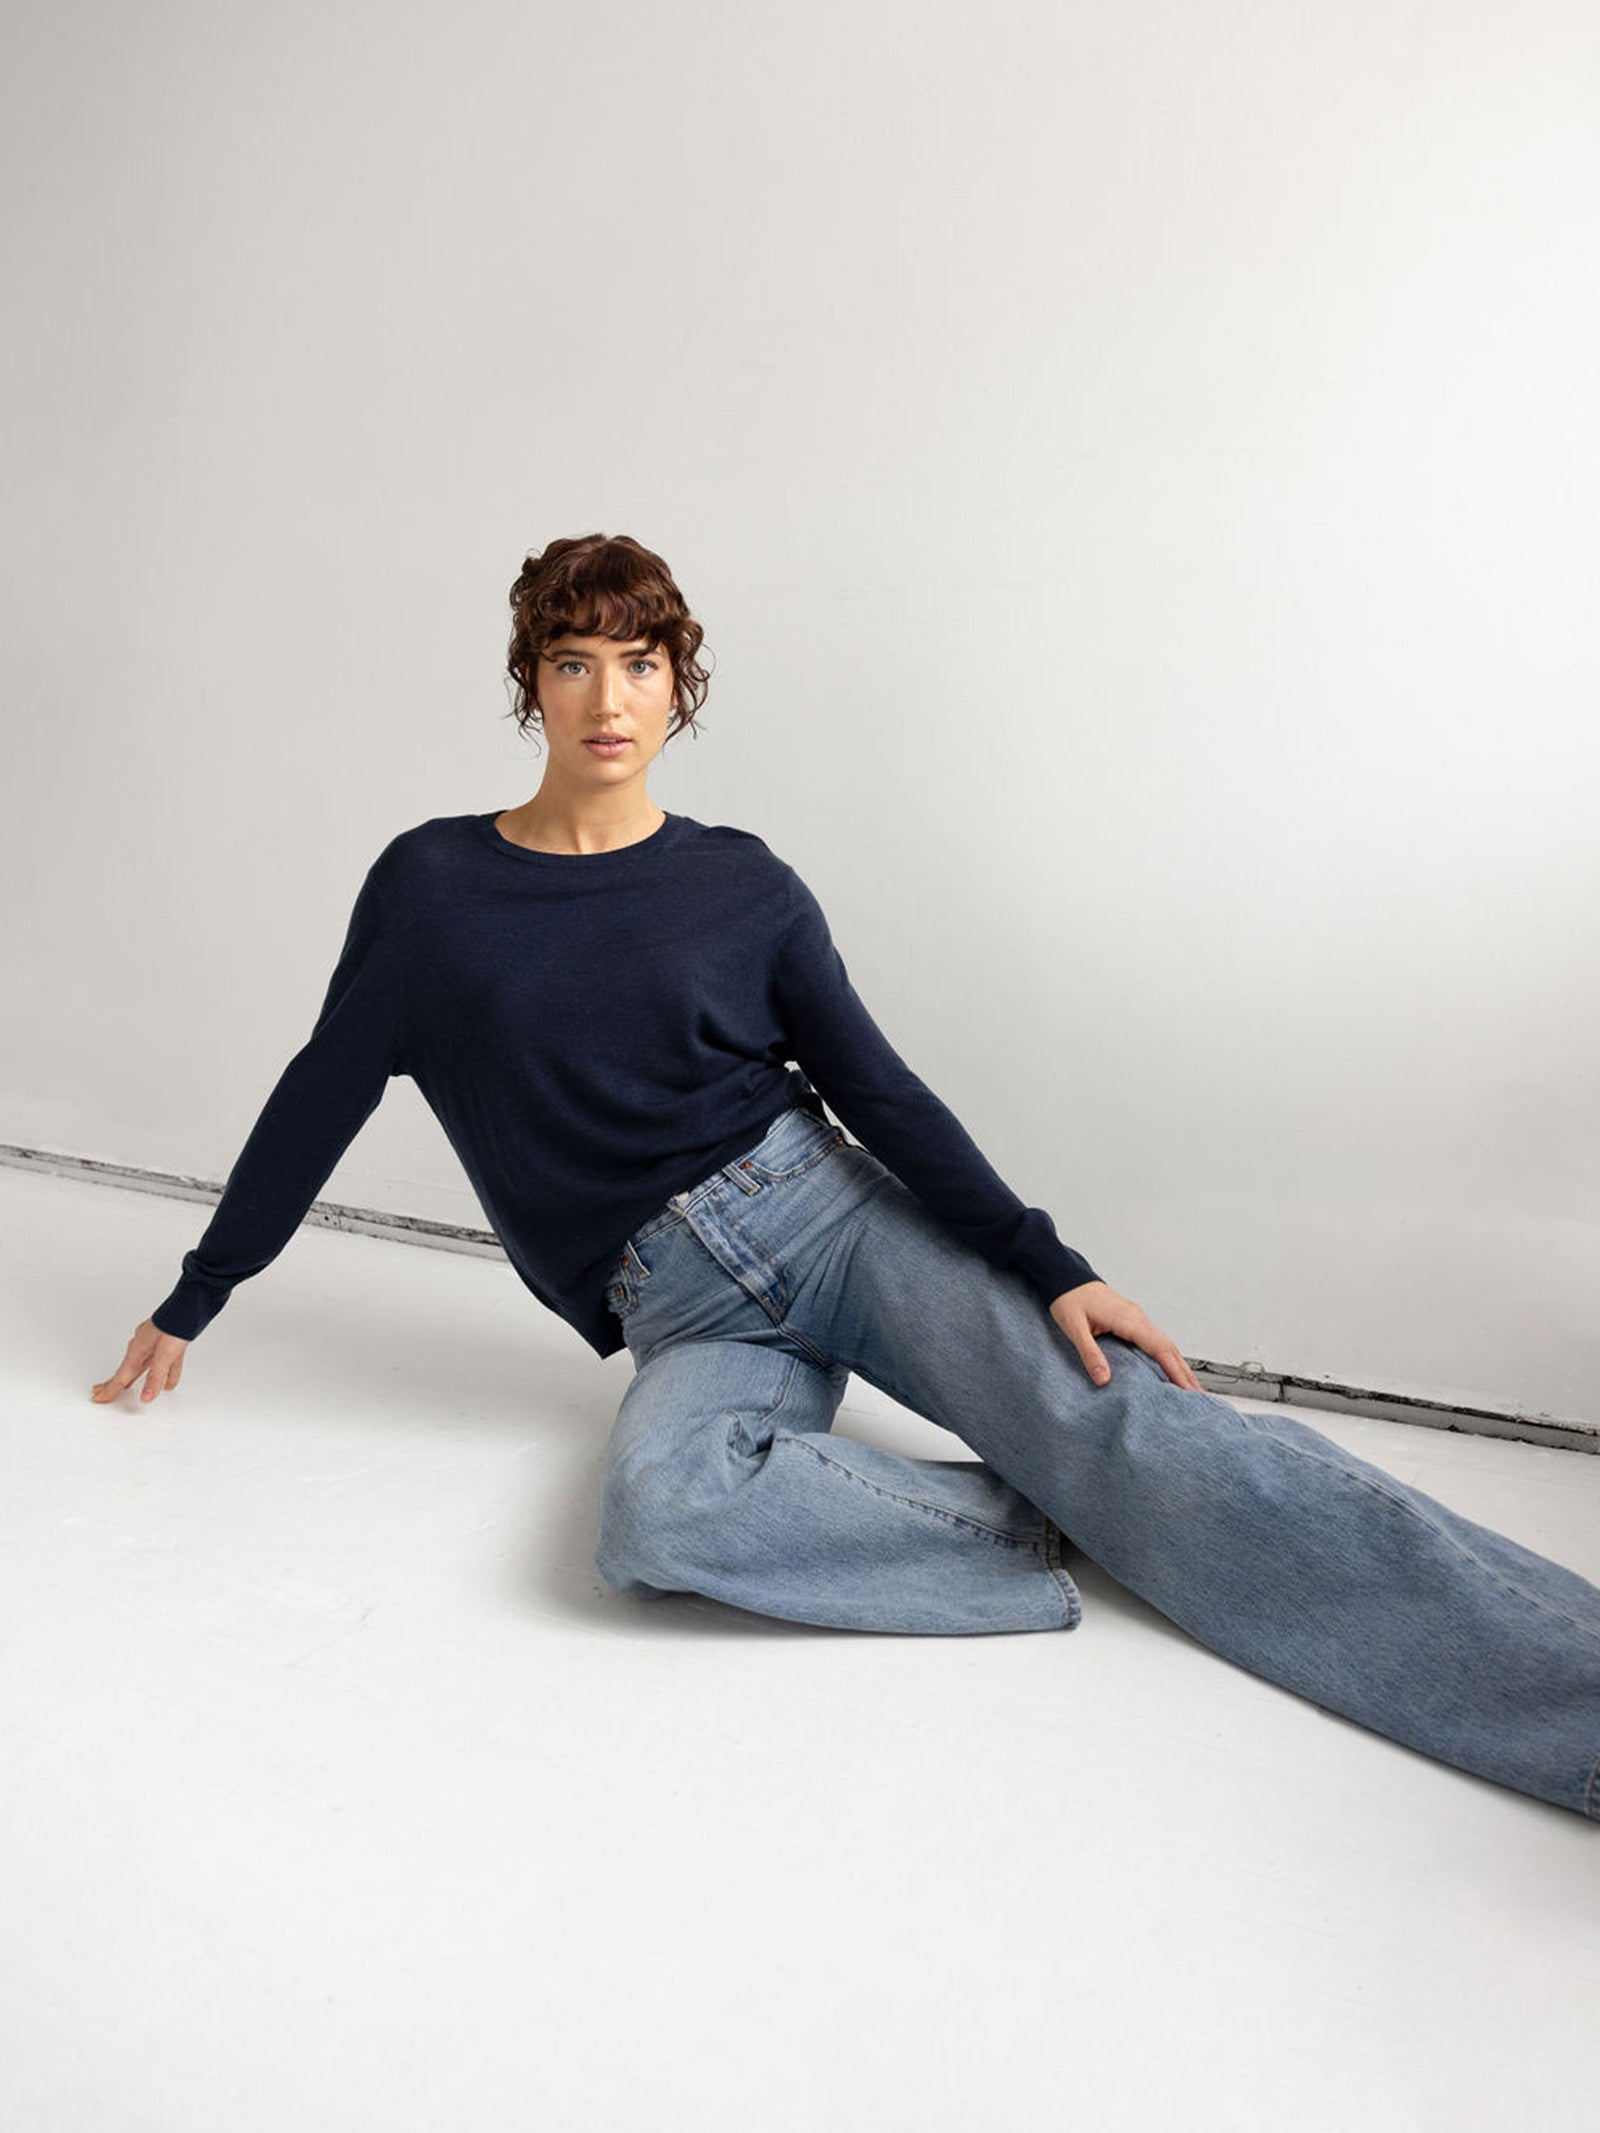 Woman lying on her side wearing jeans and an eclipse airknit sweater with white background 